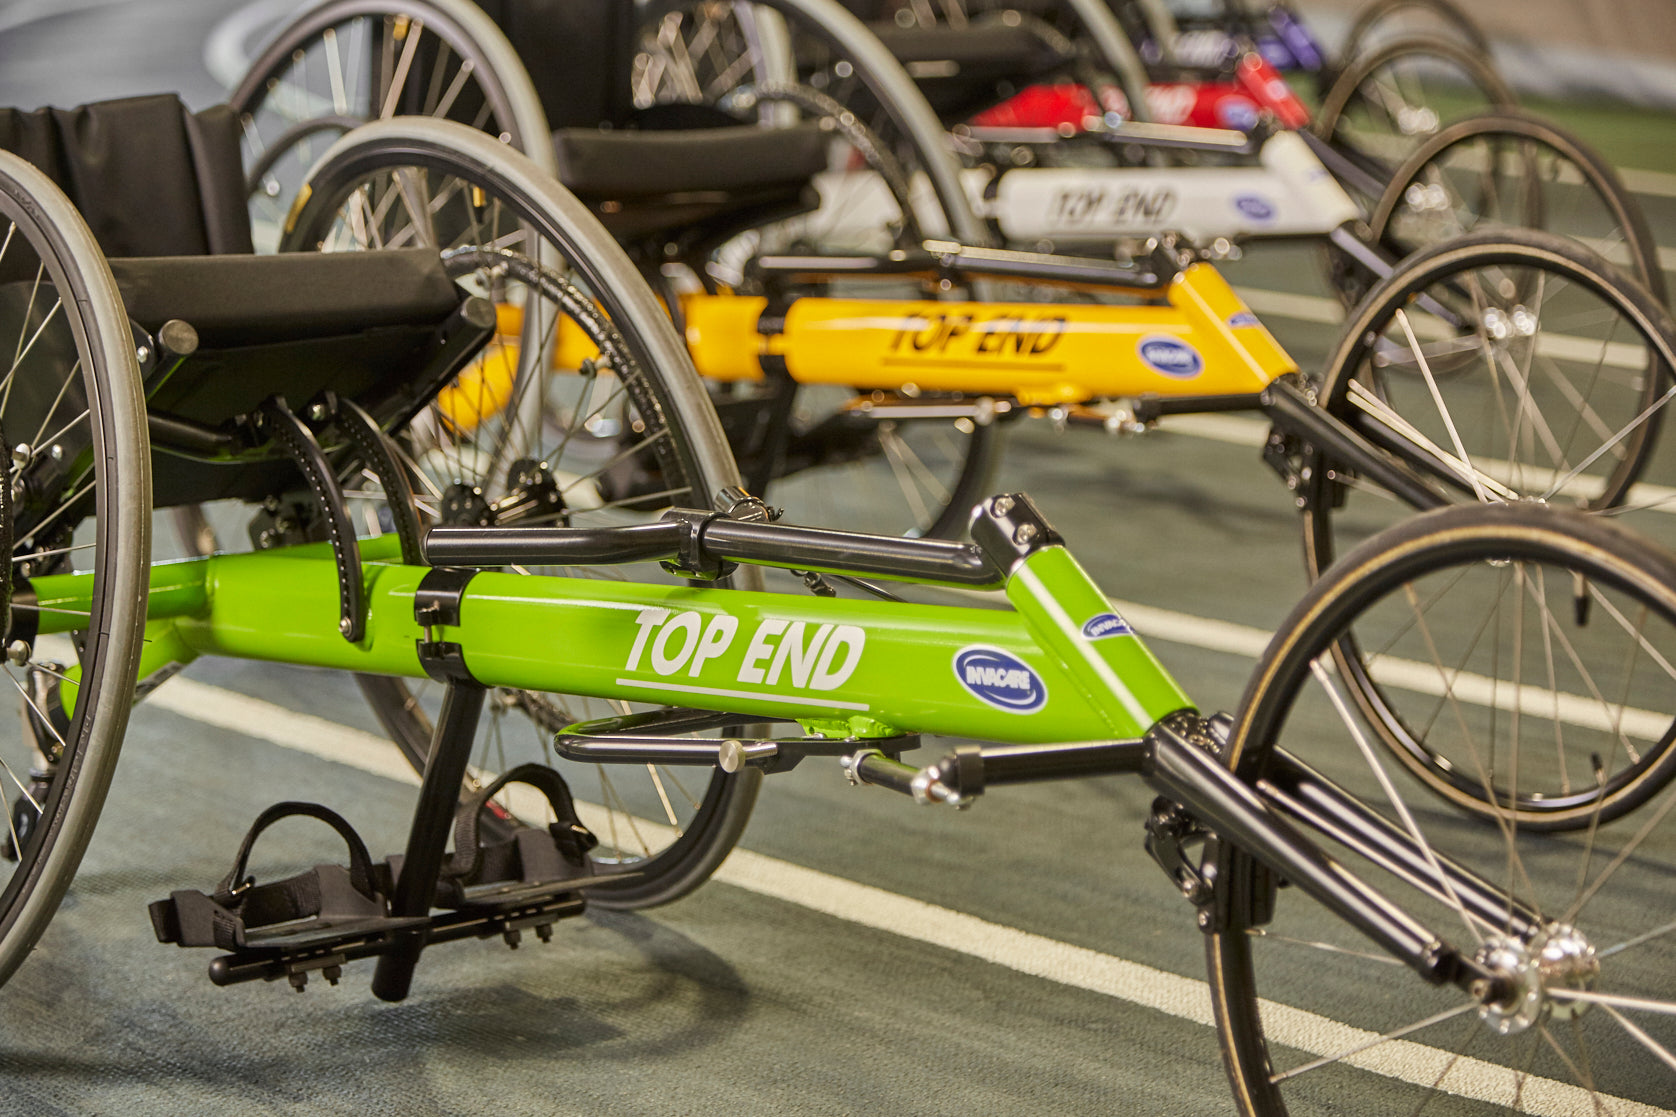 Top End Invacare Adaptive Cycles